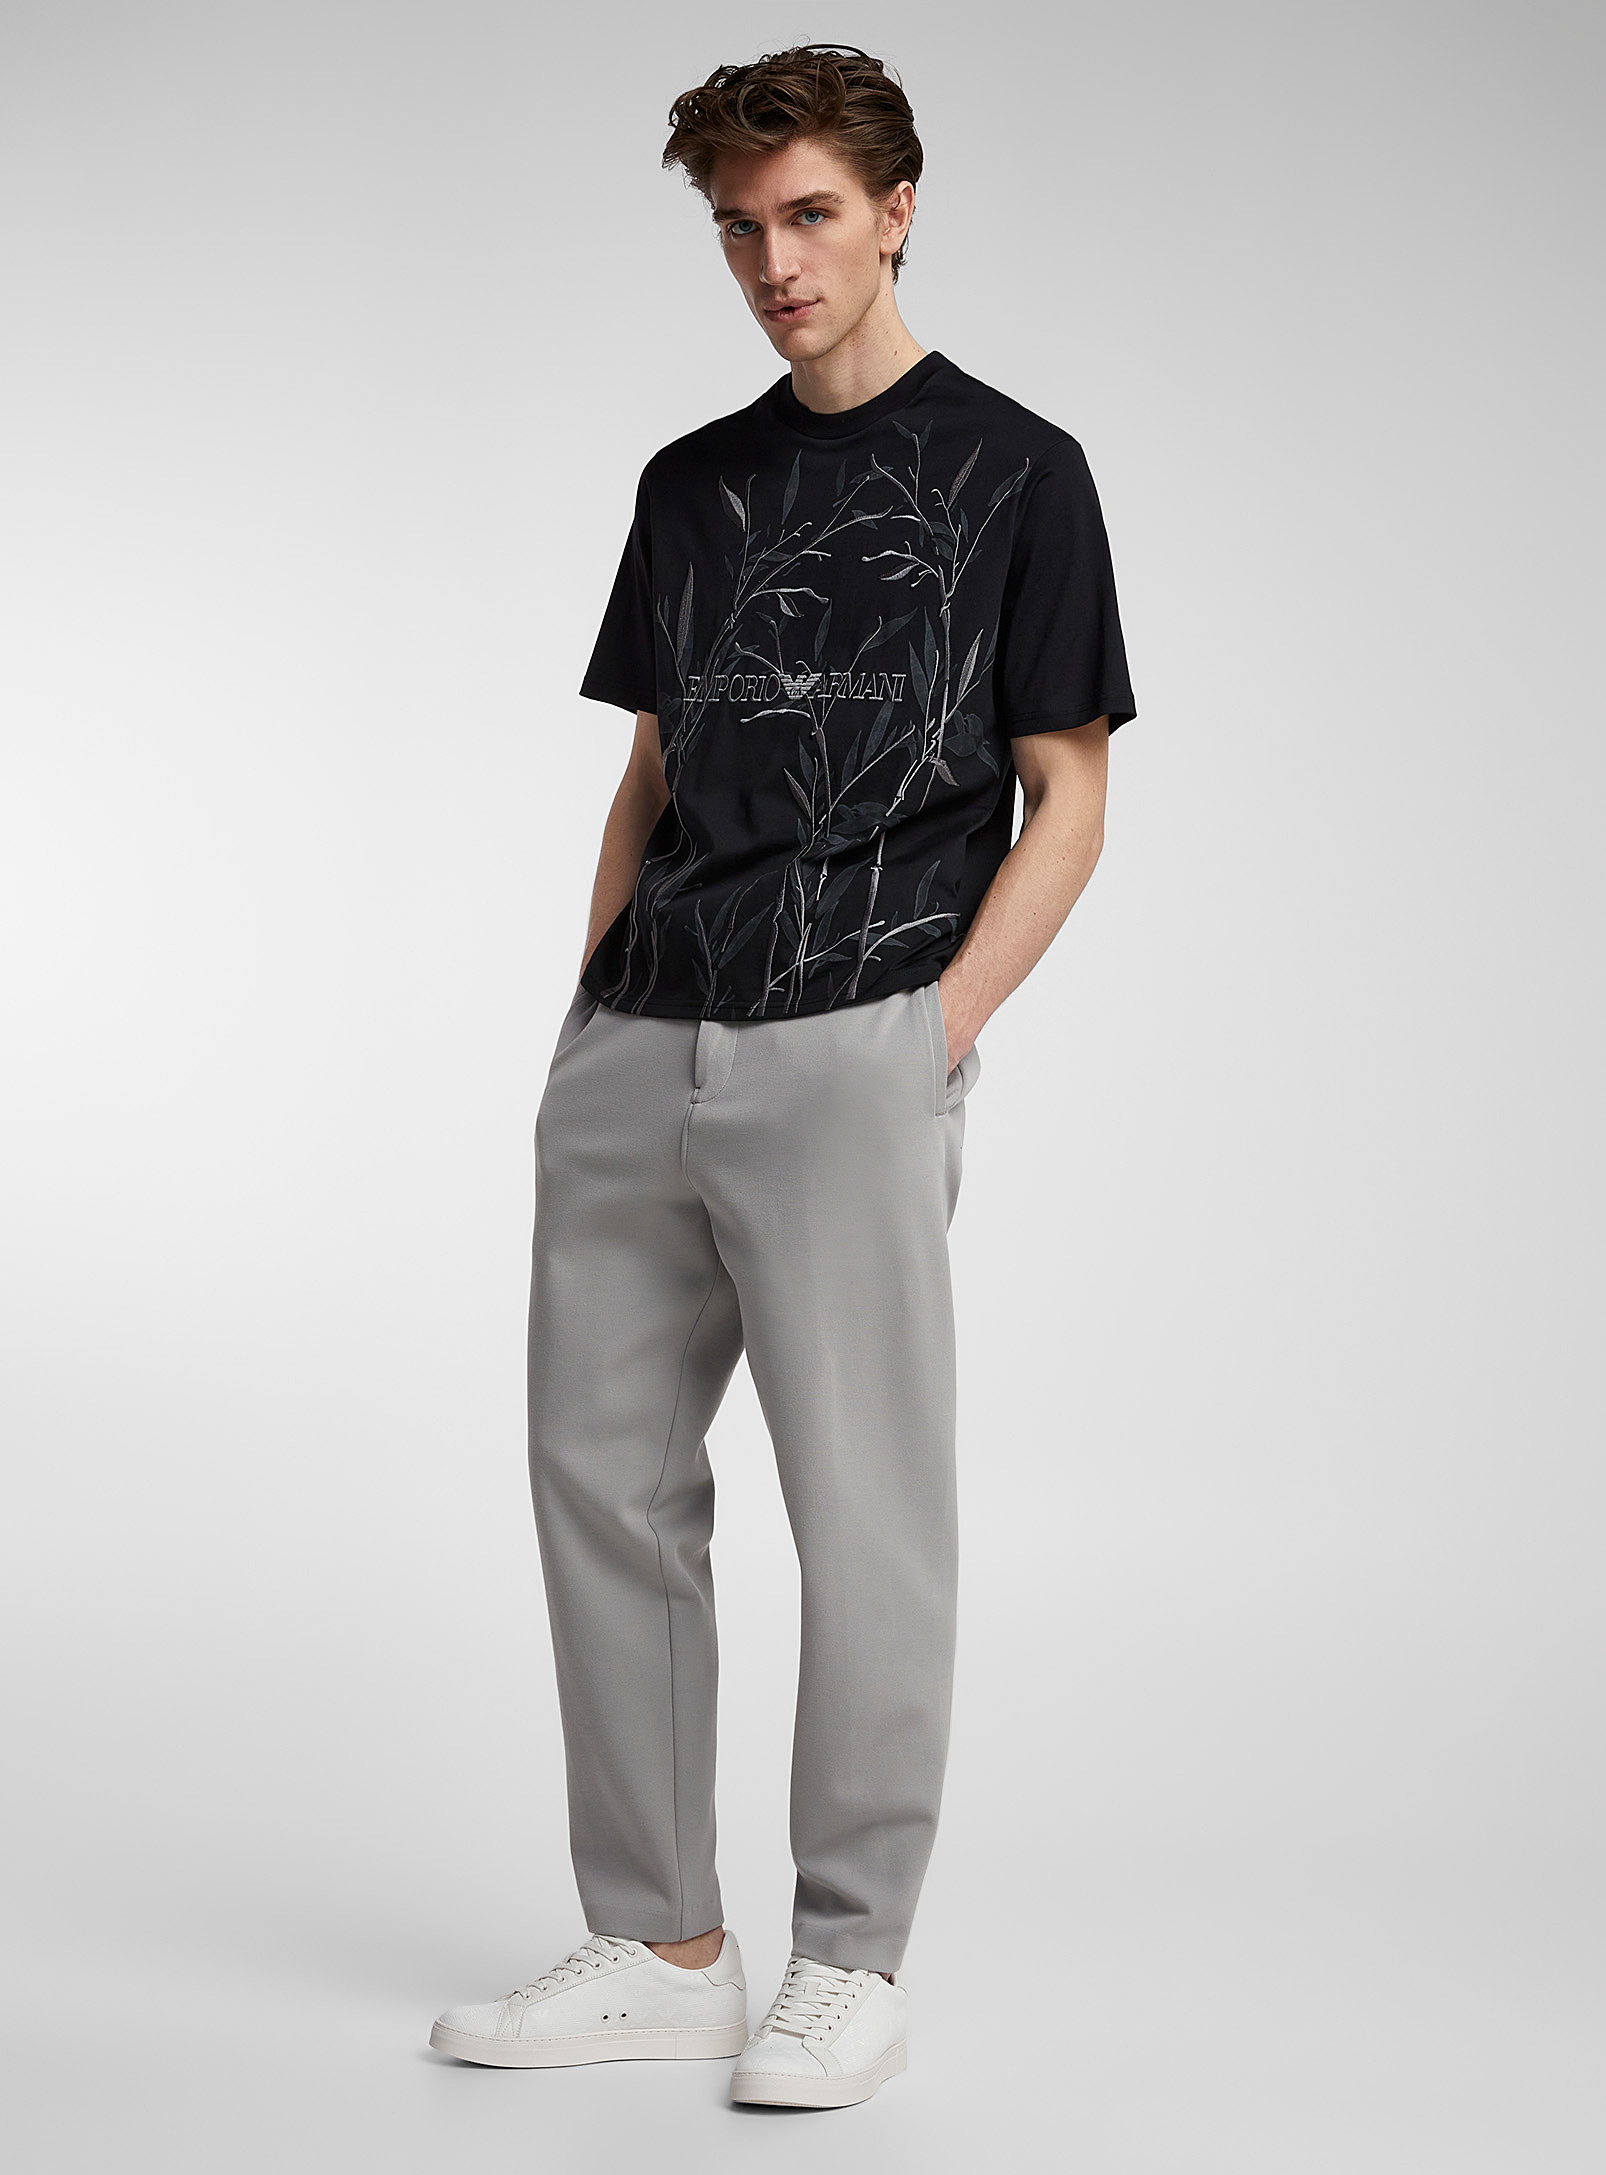 Emporio Armani - Men's Structured jersey pant